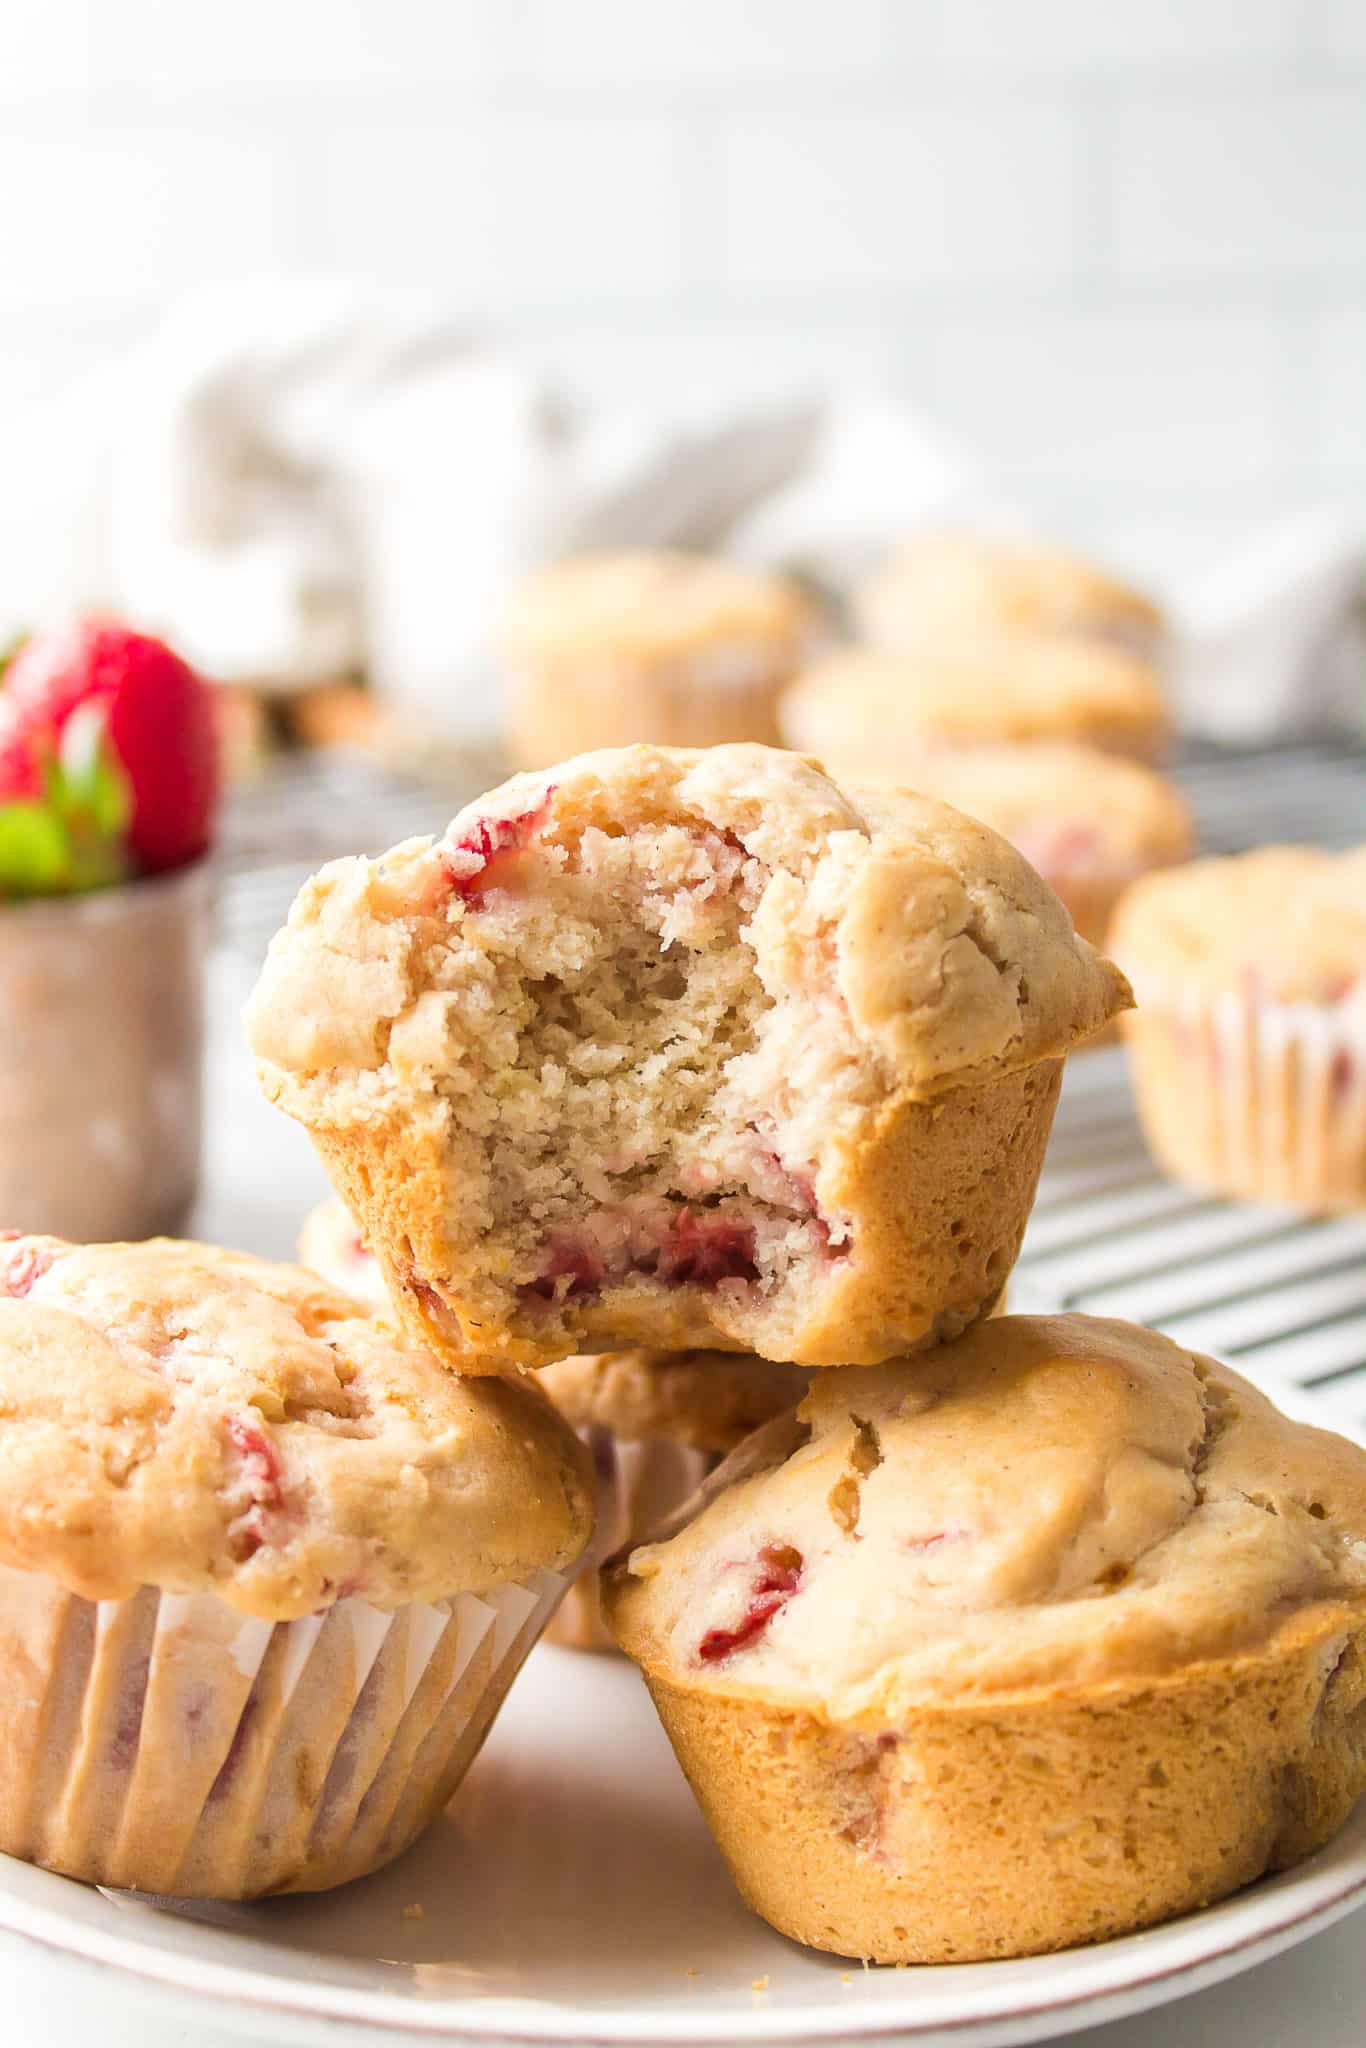 strawberry muffins stacked on each other with a bite taken out of one.